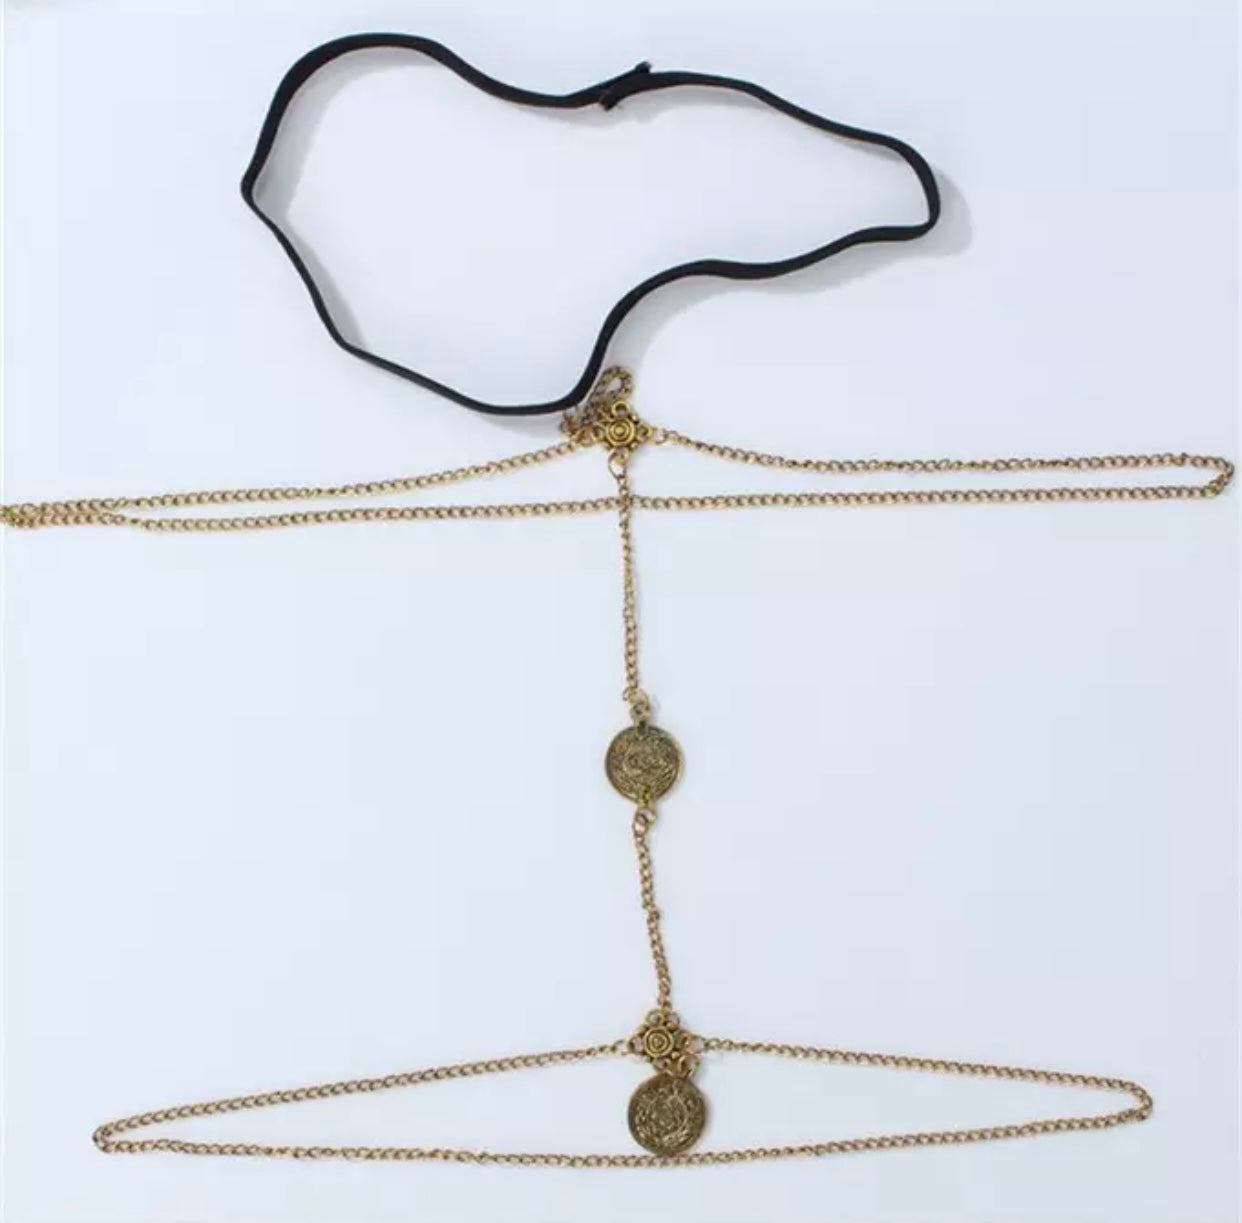 Vintage Gold Thigh Chain with Coins